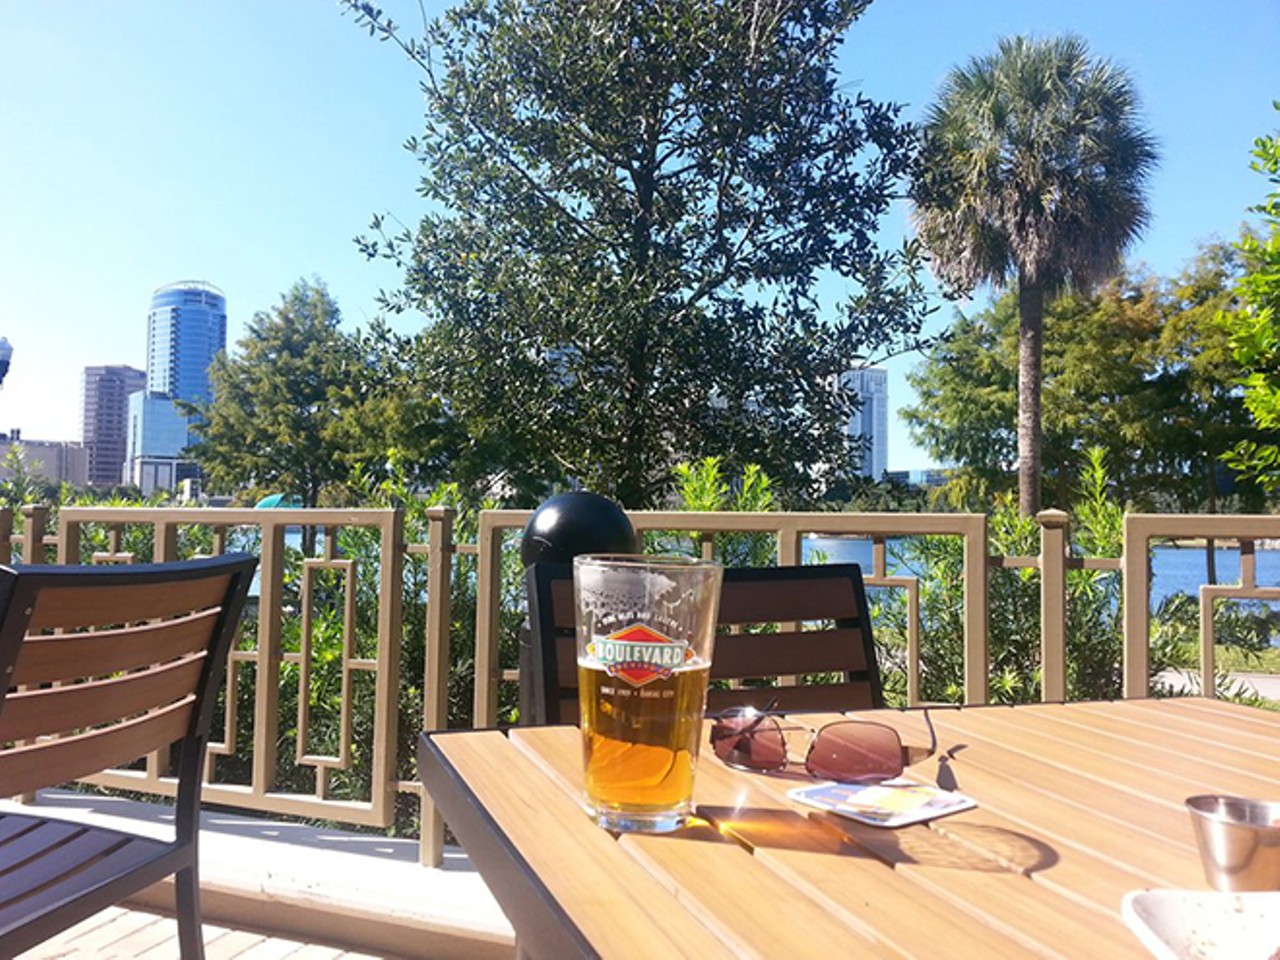 Drink at World of Beer while the kids play in the park
The downtown Orlando World of Beer is conveniently located across from a park, which means parents can get their drink on and supervise their children running wild&#150;responsibly, or course. 
Price: entirely up to you
Photo via Yelp